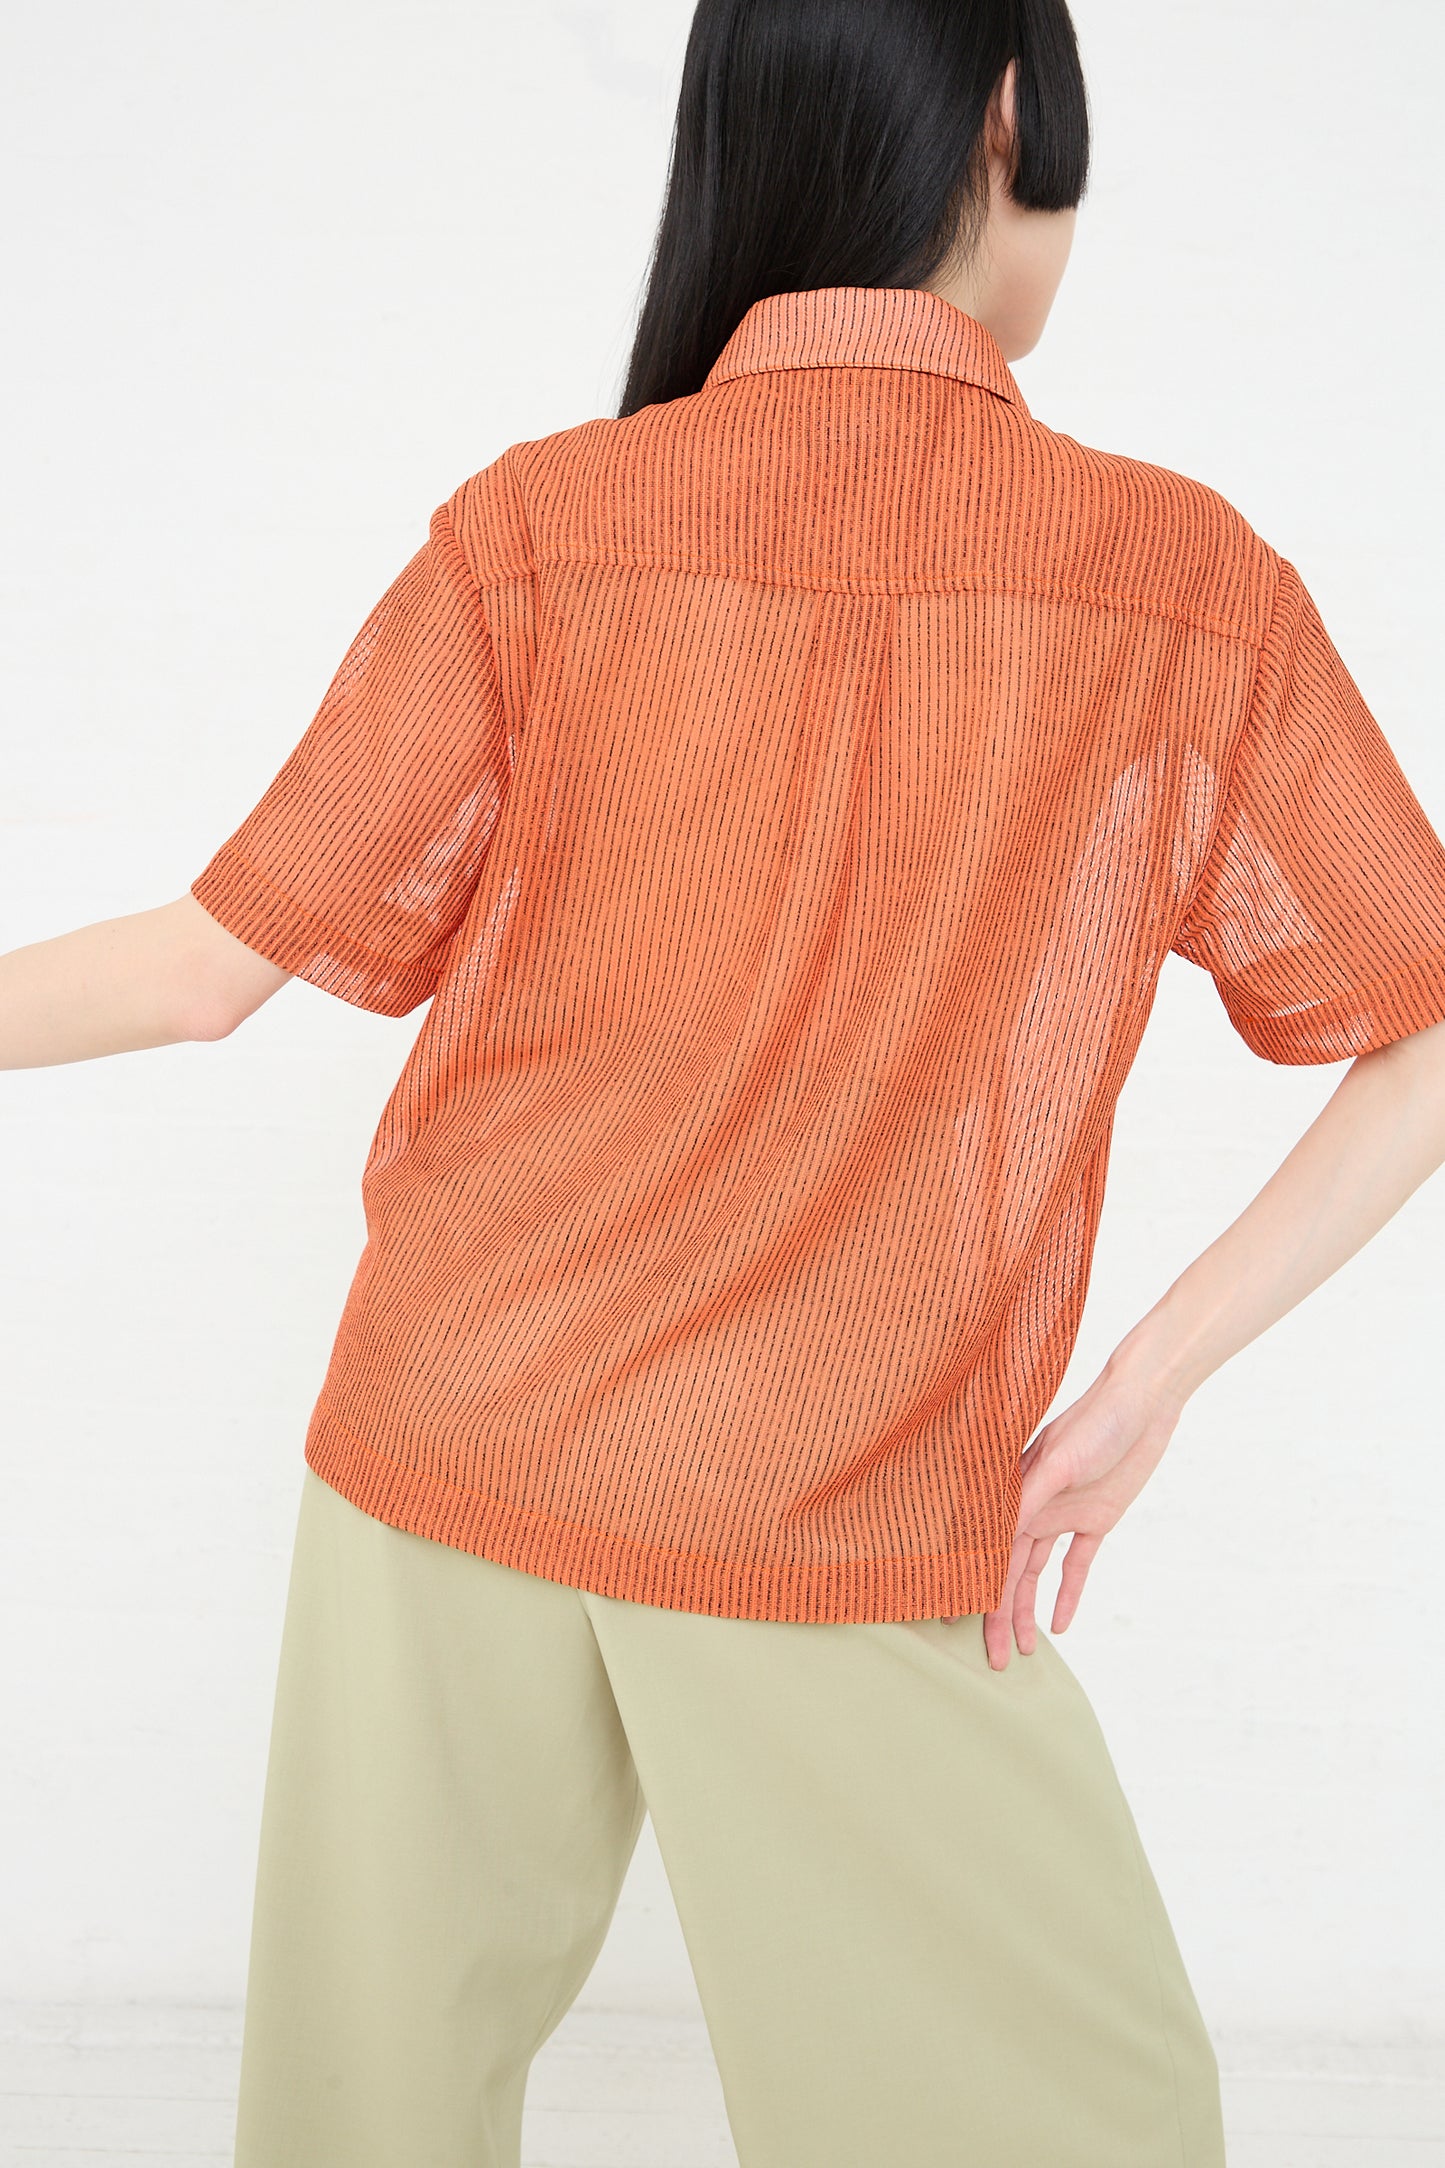 A woman seen from behind wearing a Rejina Pyo Mesh Stripe Marty Shirt in Orange and khaki pants.